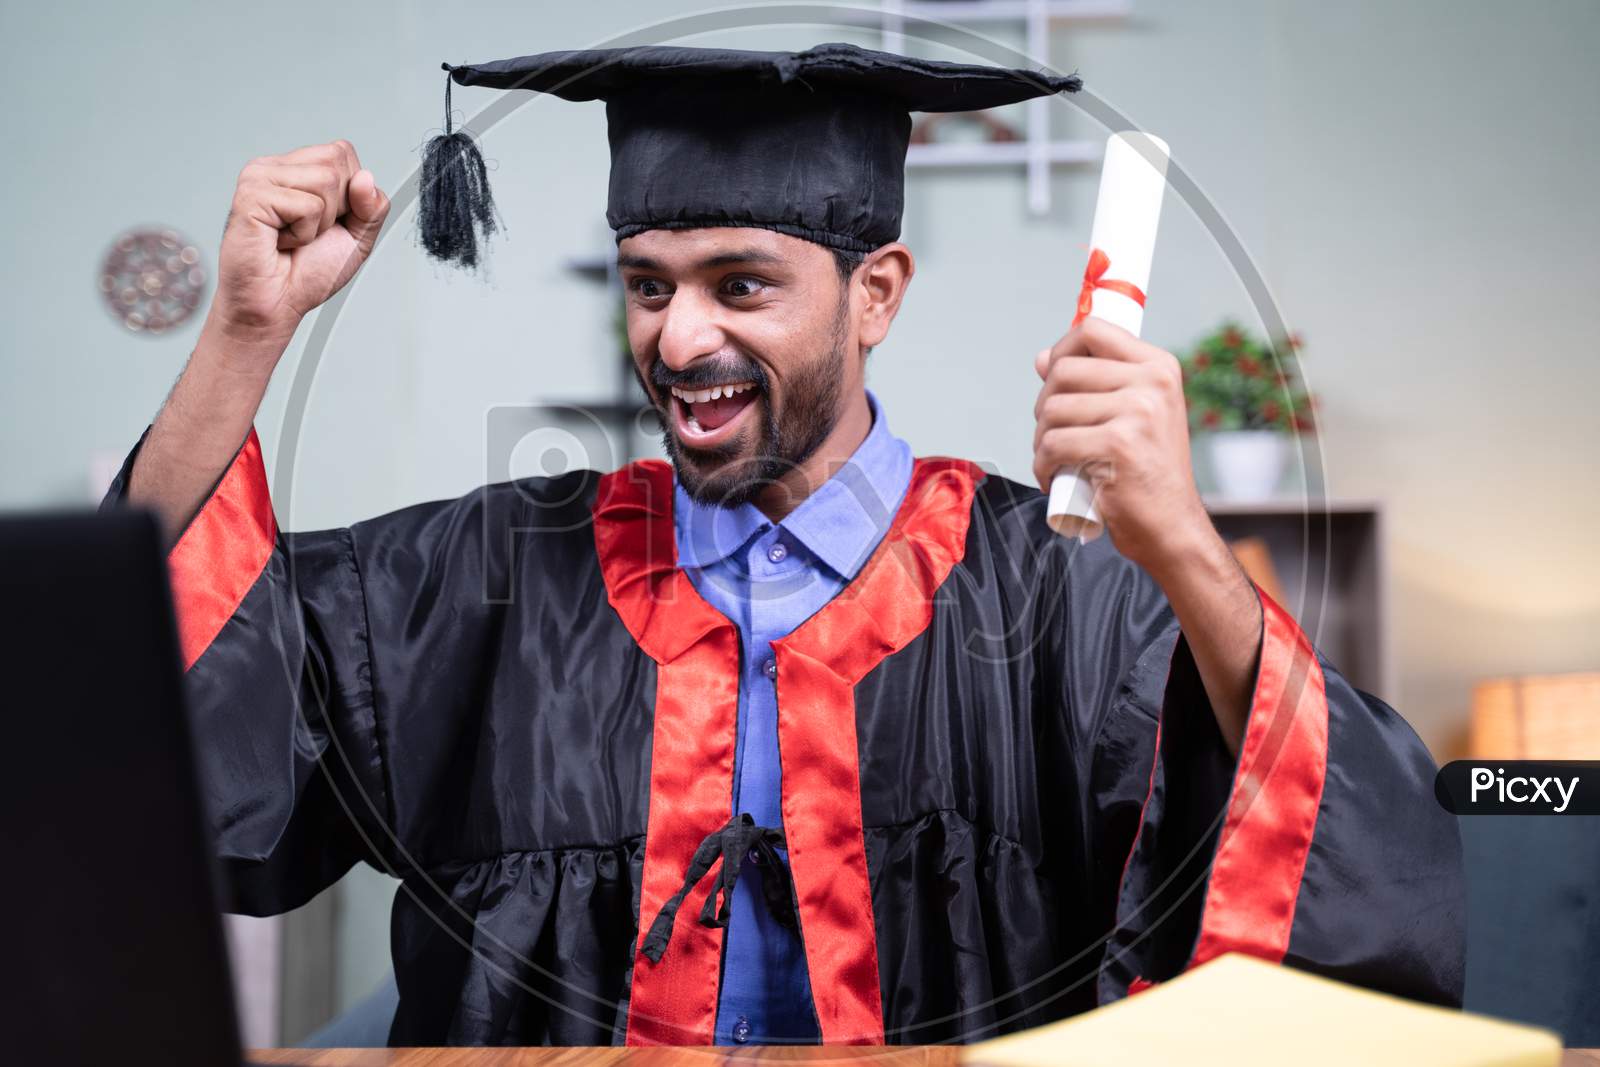 Young Man Excited Over Announcing Graduation Names Over Video Call While Holding Certificate - Concept Virtual Graduation New Normal Due To Covid-19 Coronavirus Safety Measures.